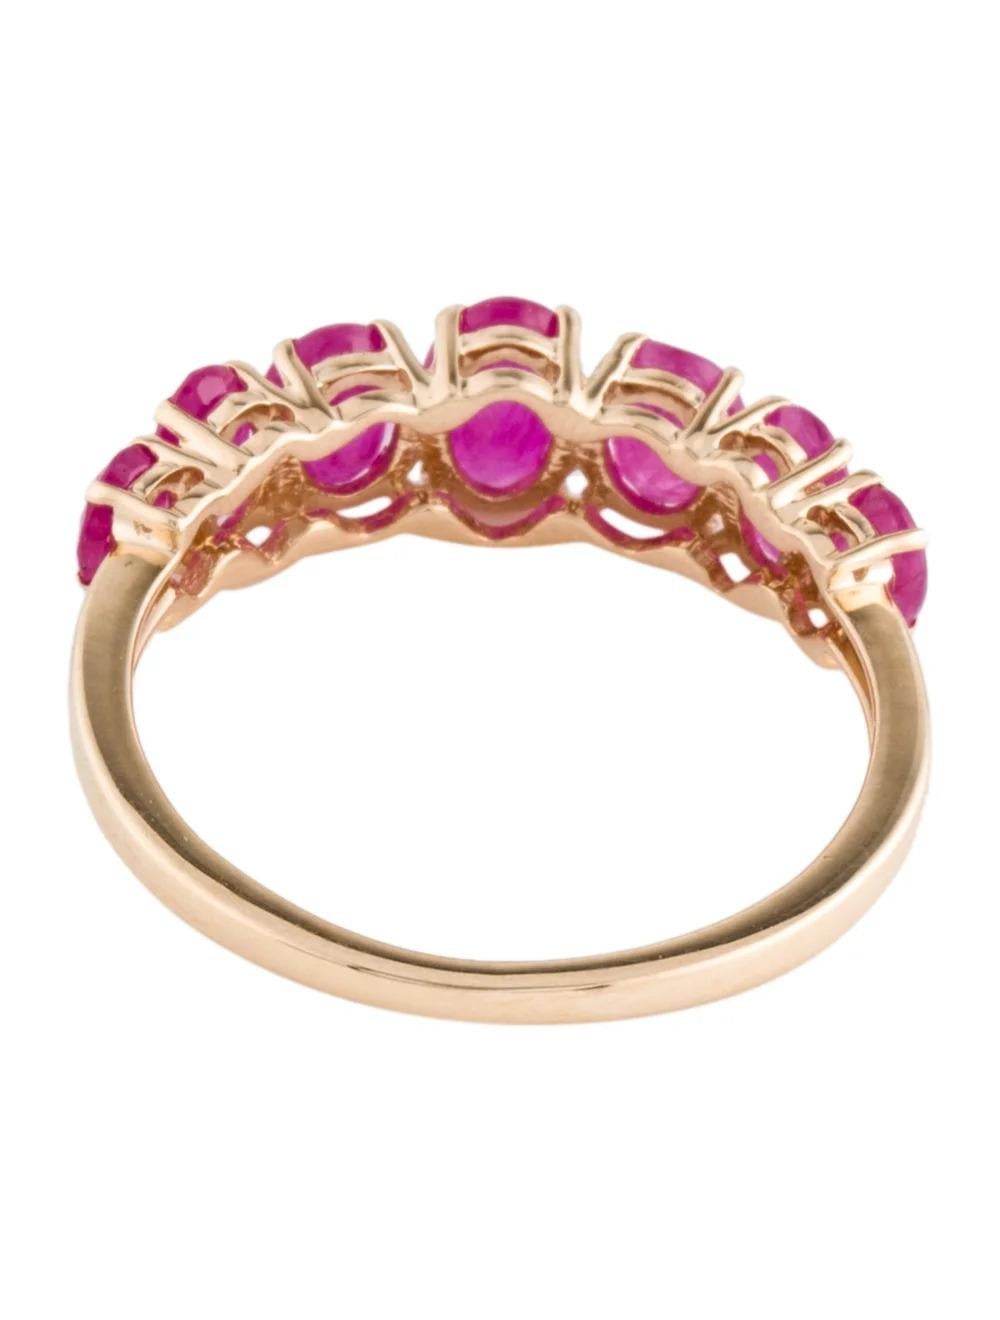 14K Ruby Band Ring Size 8 - Vibrant Gemstone, Yellow Gold, Elegant Design In New Condition For Sale In Holtsville, NY